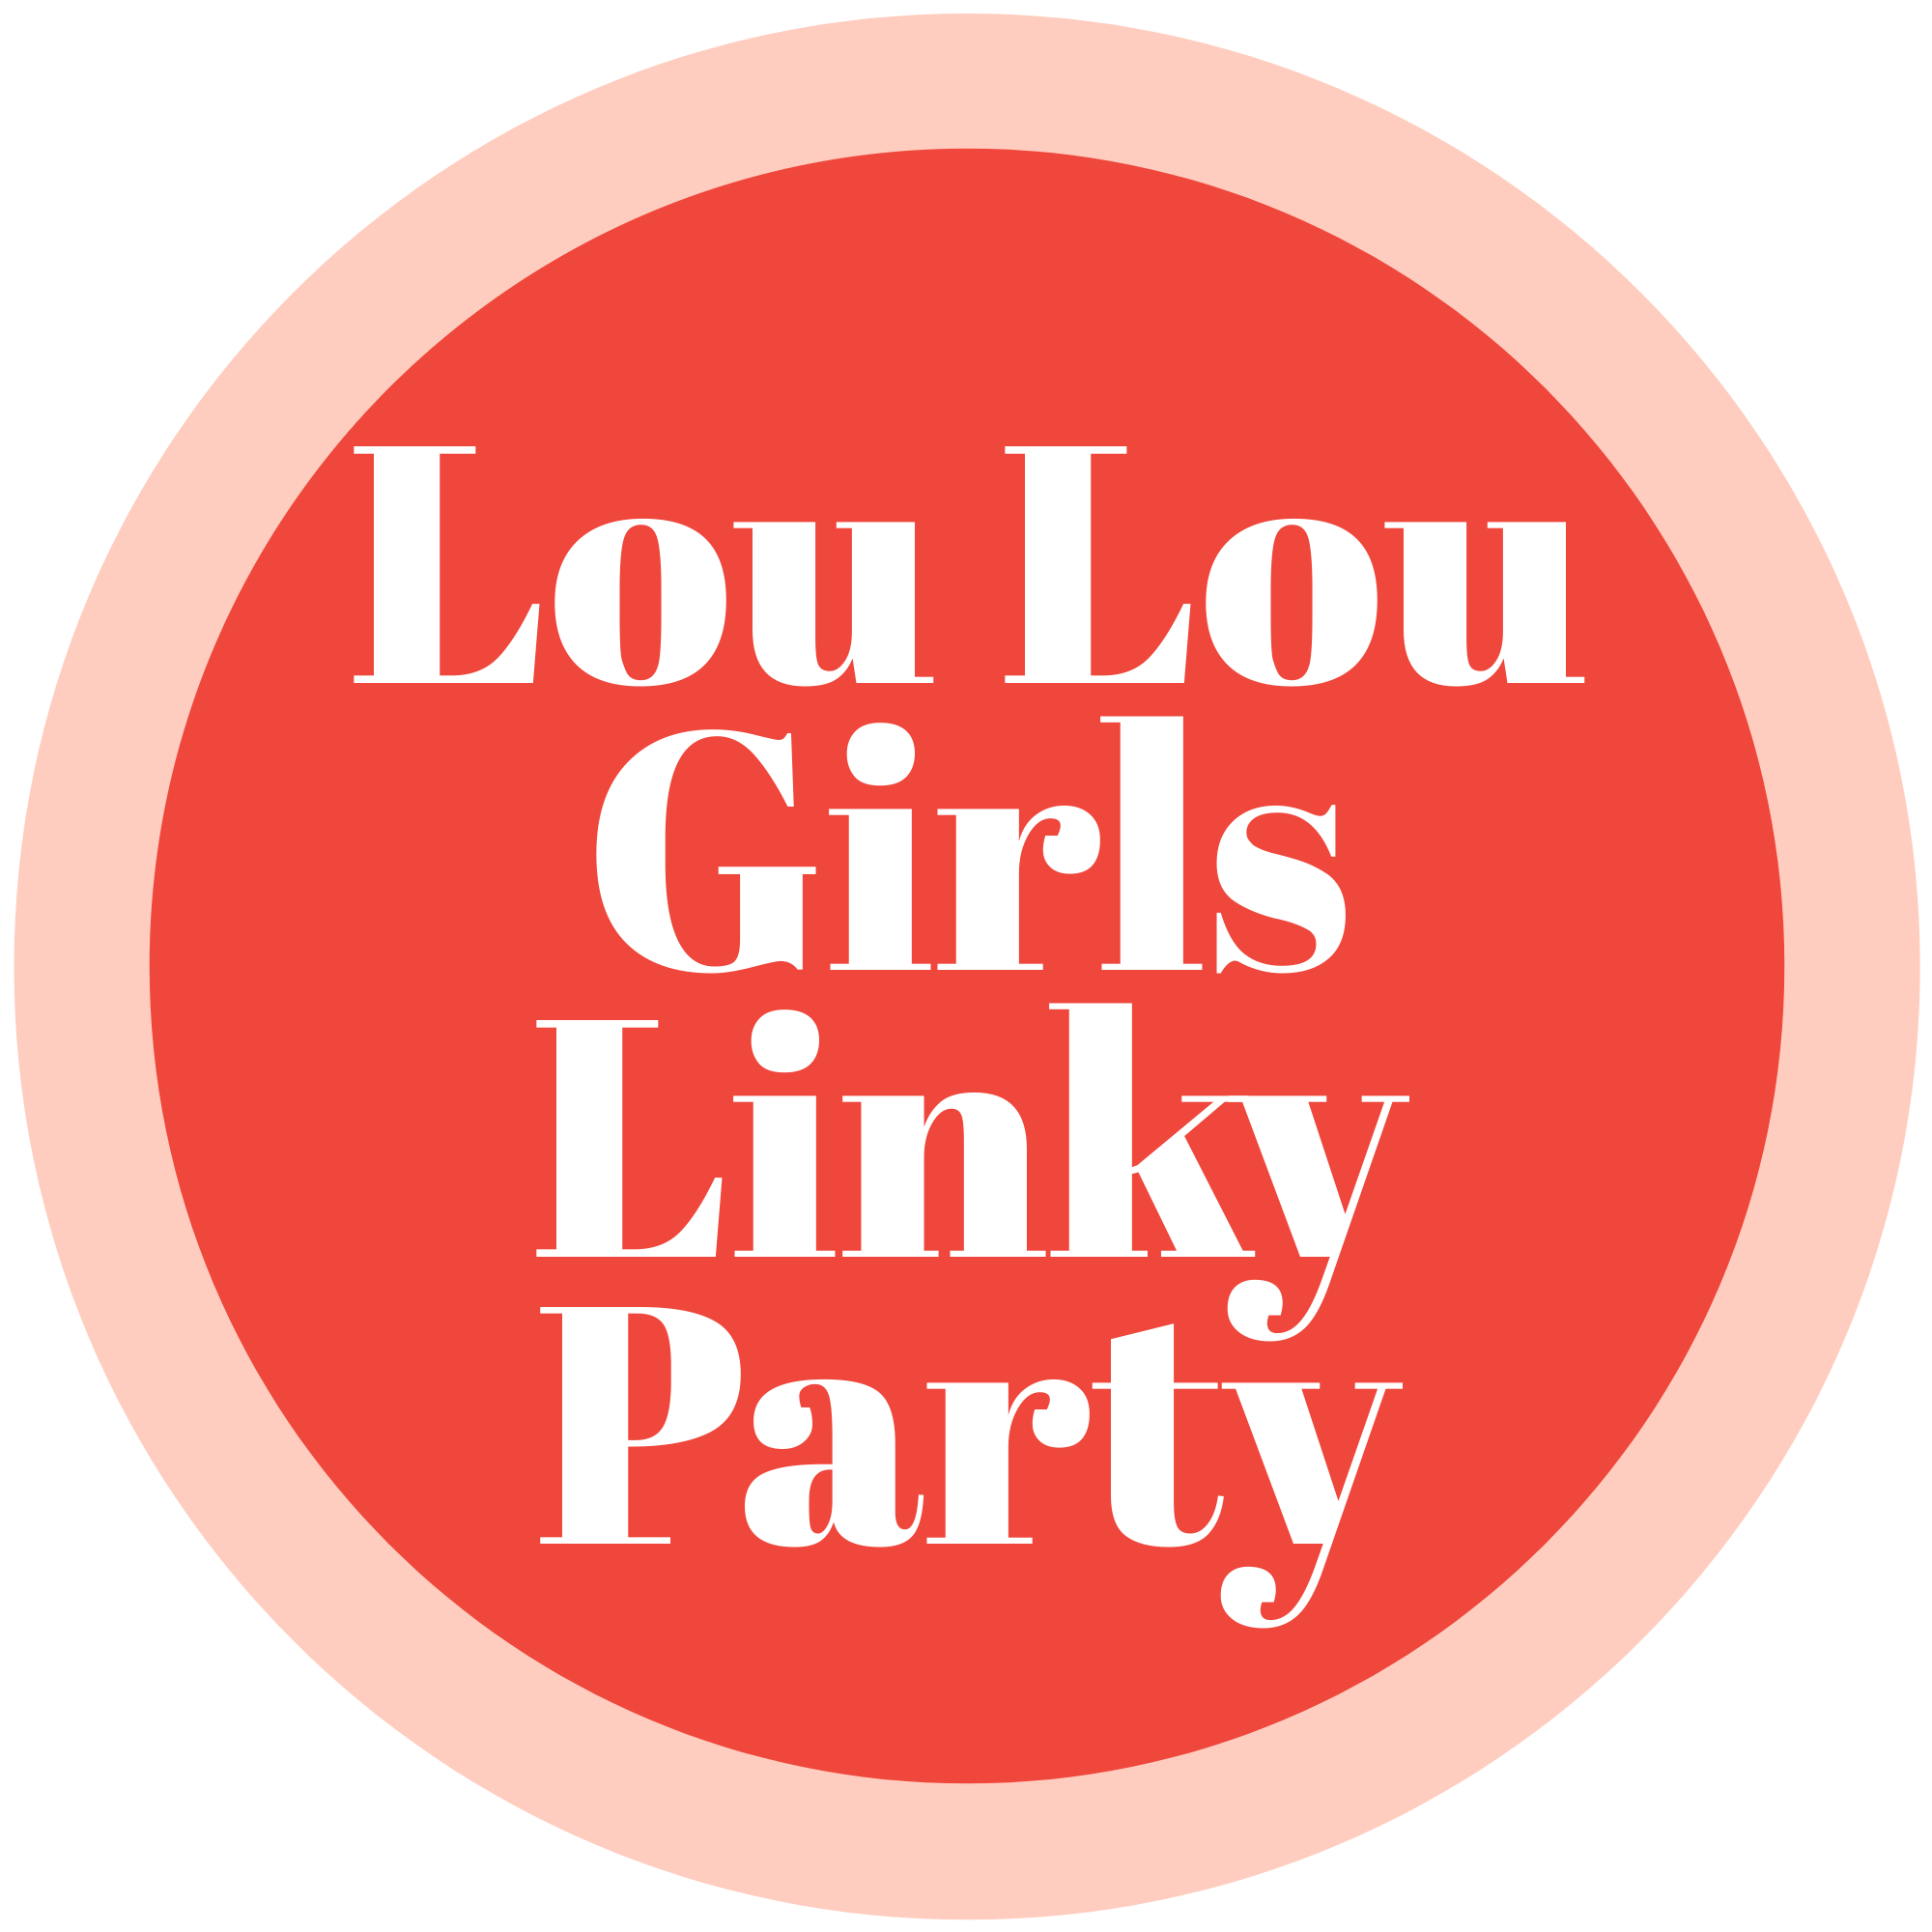 Lou Lou Girls Fabulous Party 492 #linkyparty #bloghop #linkyparties